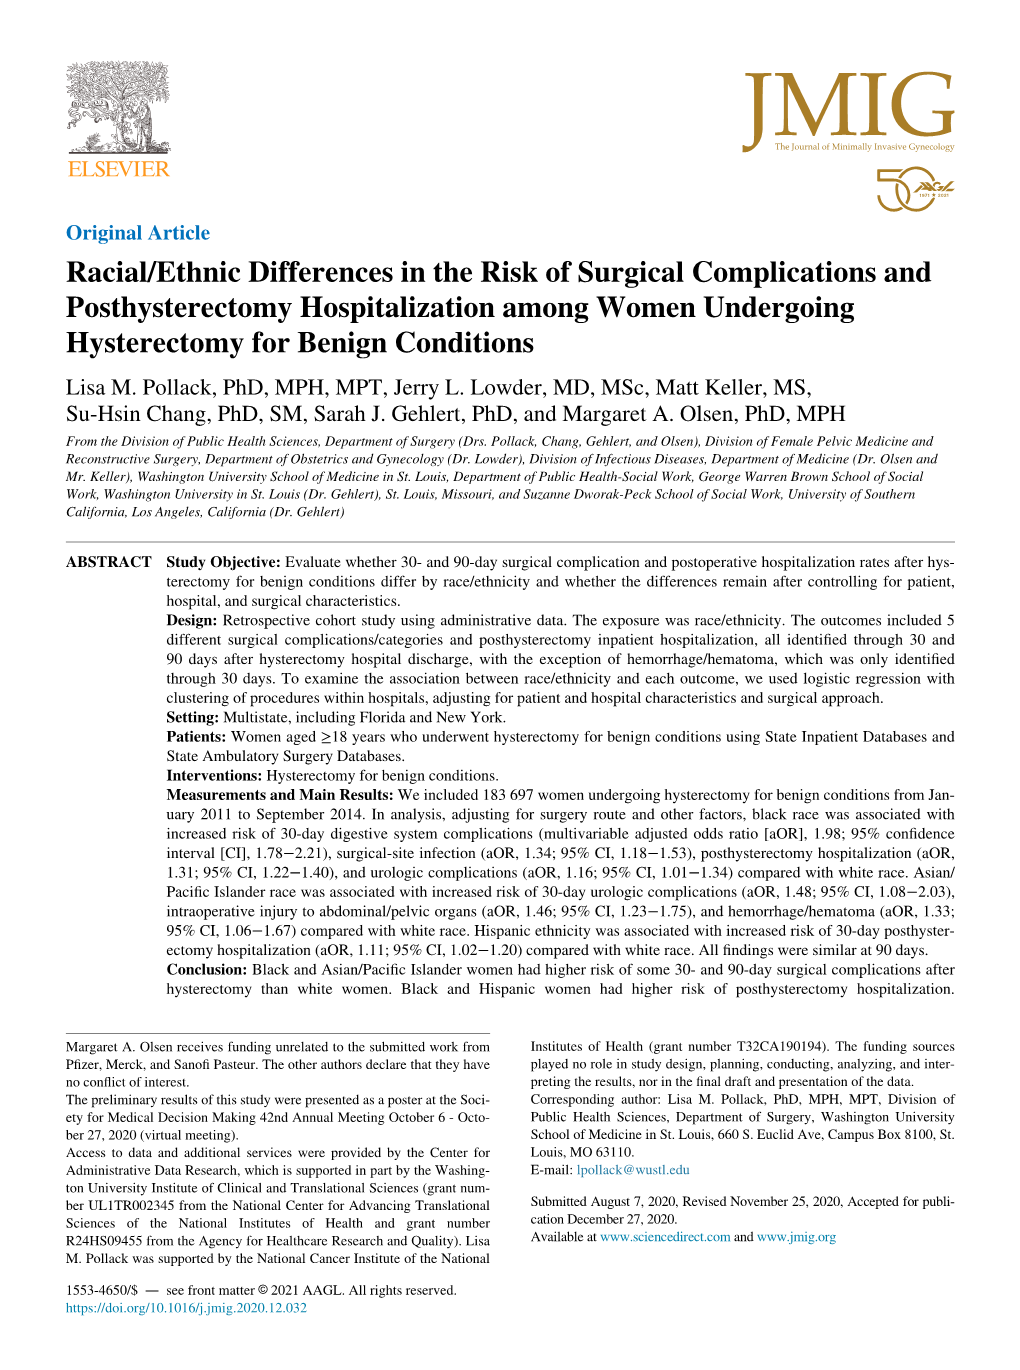 Racial/Ethnic Differences in the Risk of Surgical Complications and Posthysterectomy Hospitalization Among Women Undergoing Hysterectomy for Benign Conditions Lisa M